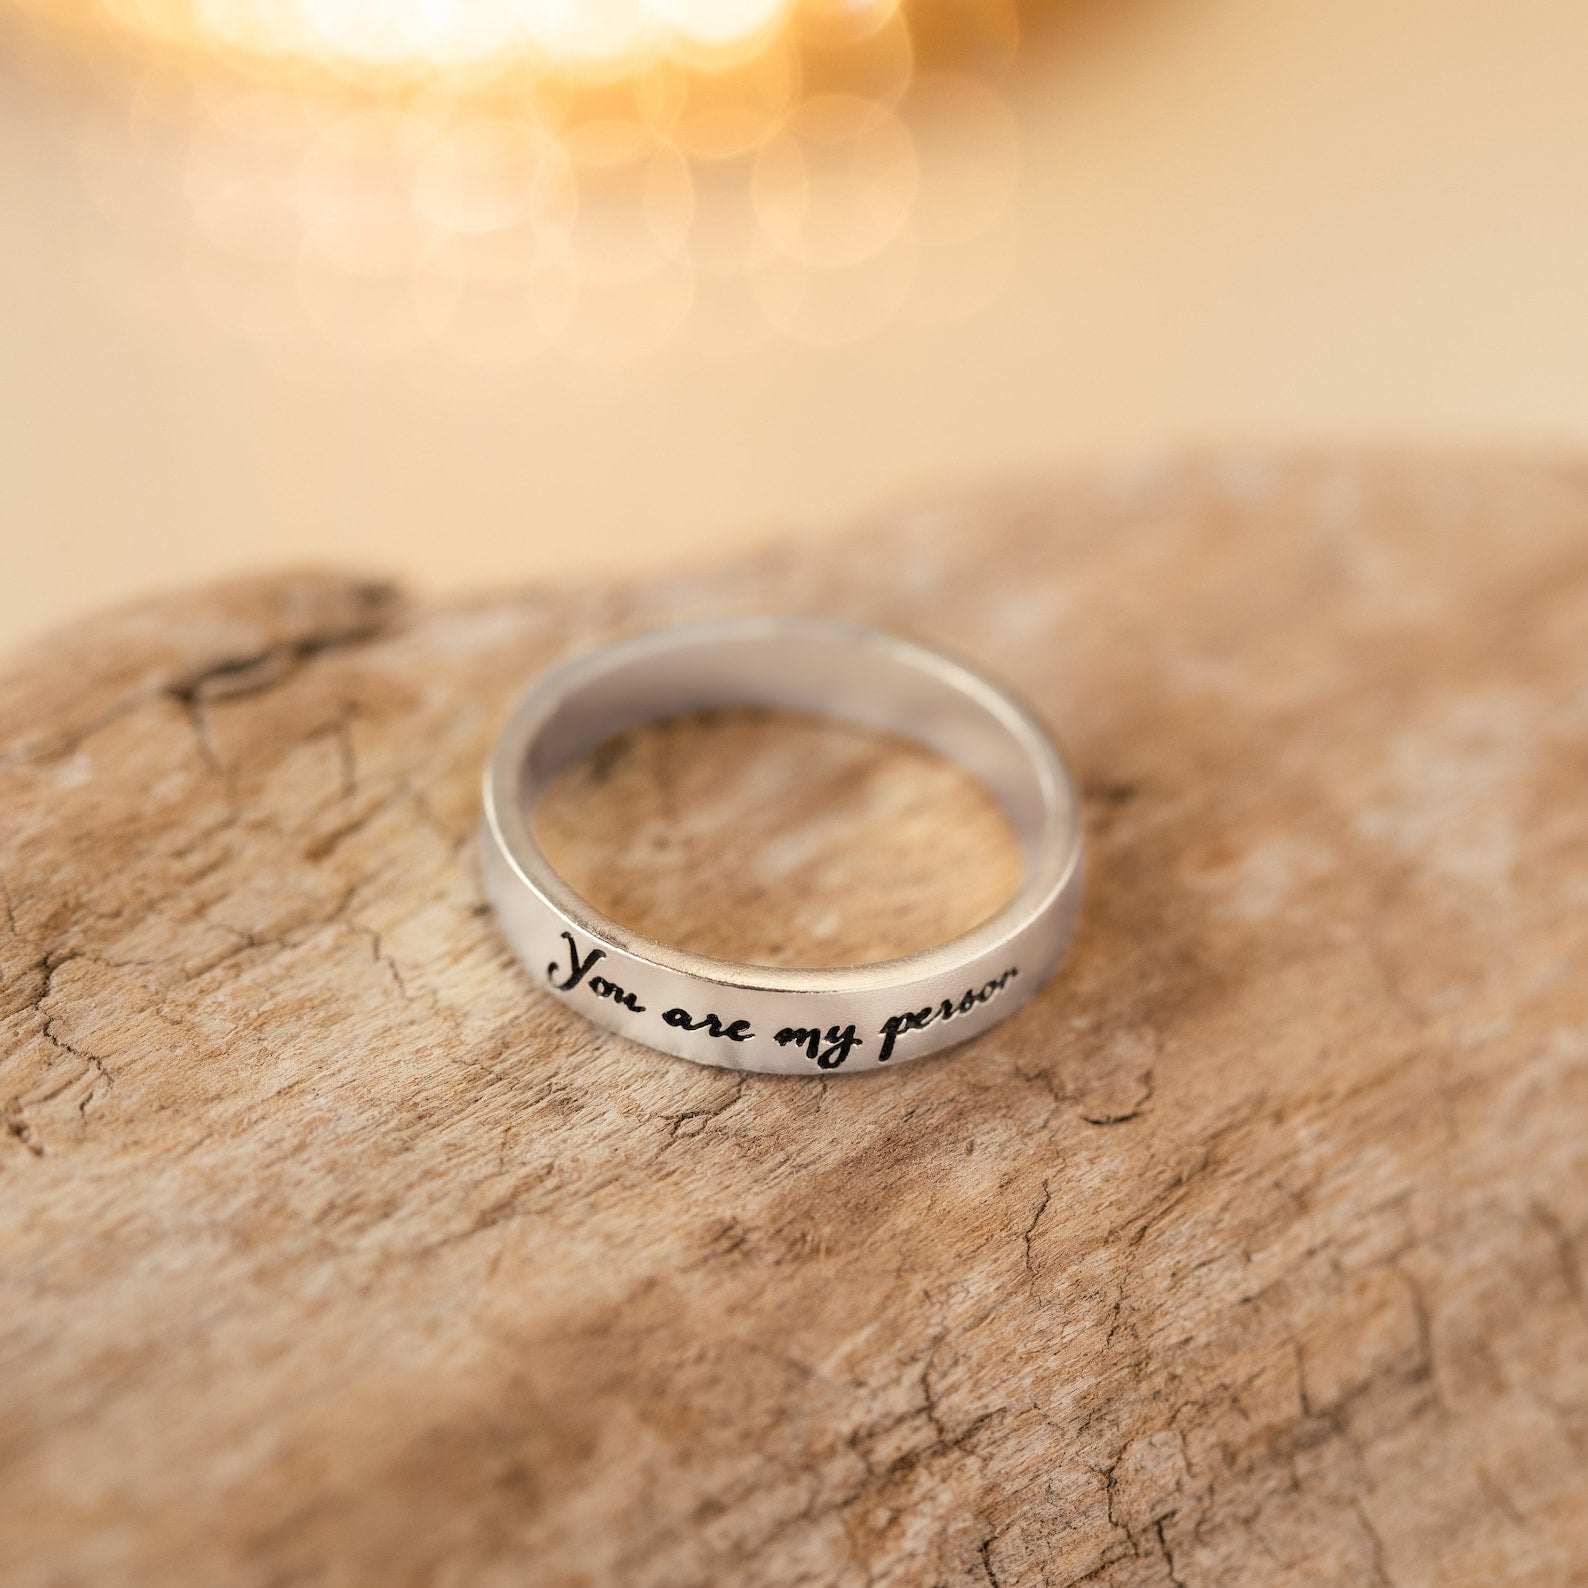 The Complete Guide to the Best Wedding Ring Engravings – RockHer.com